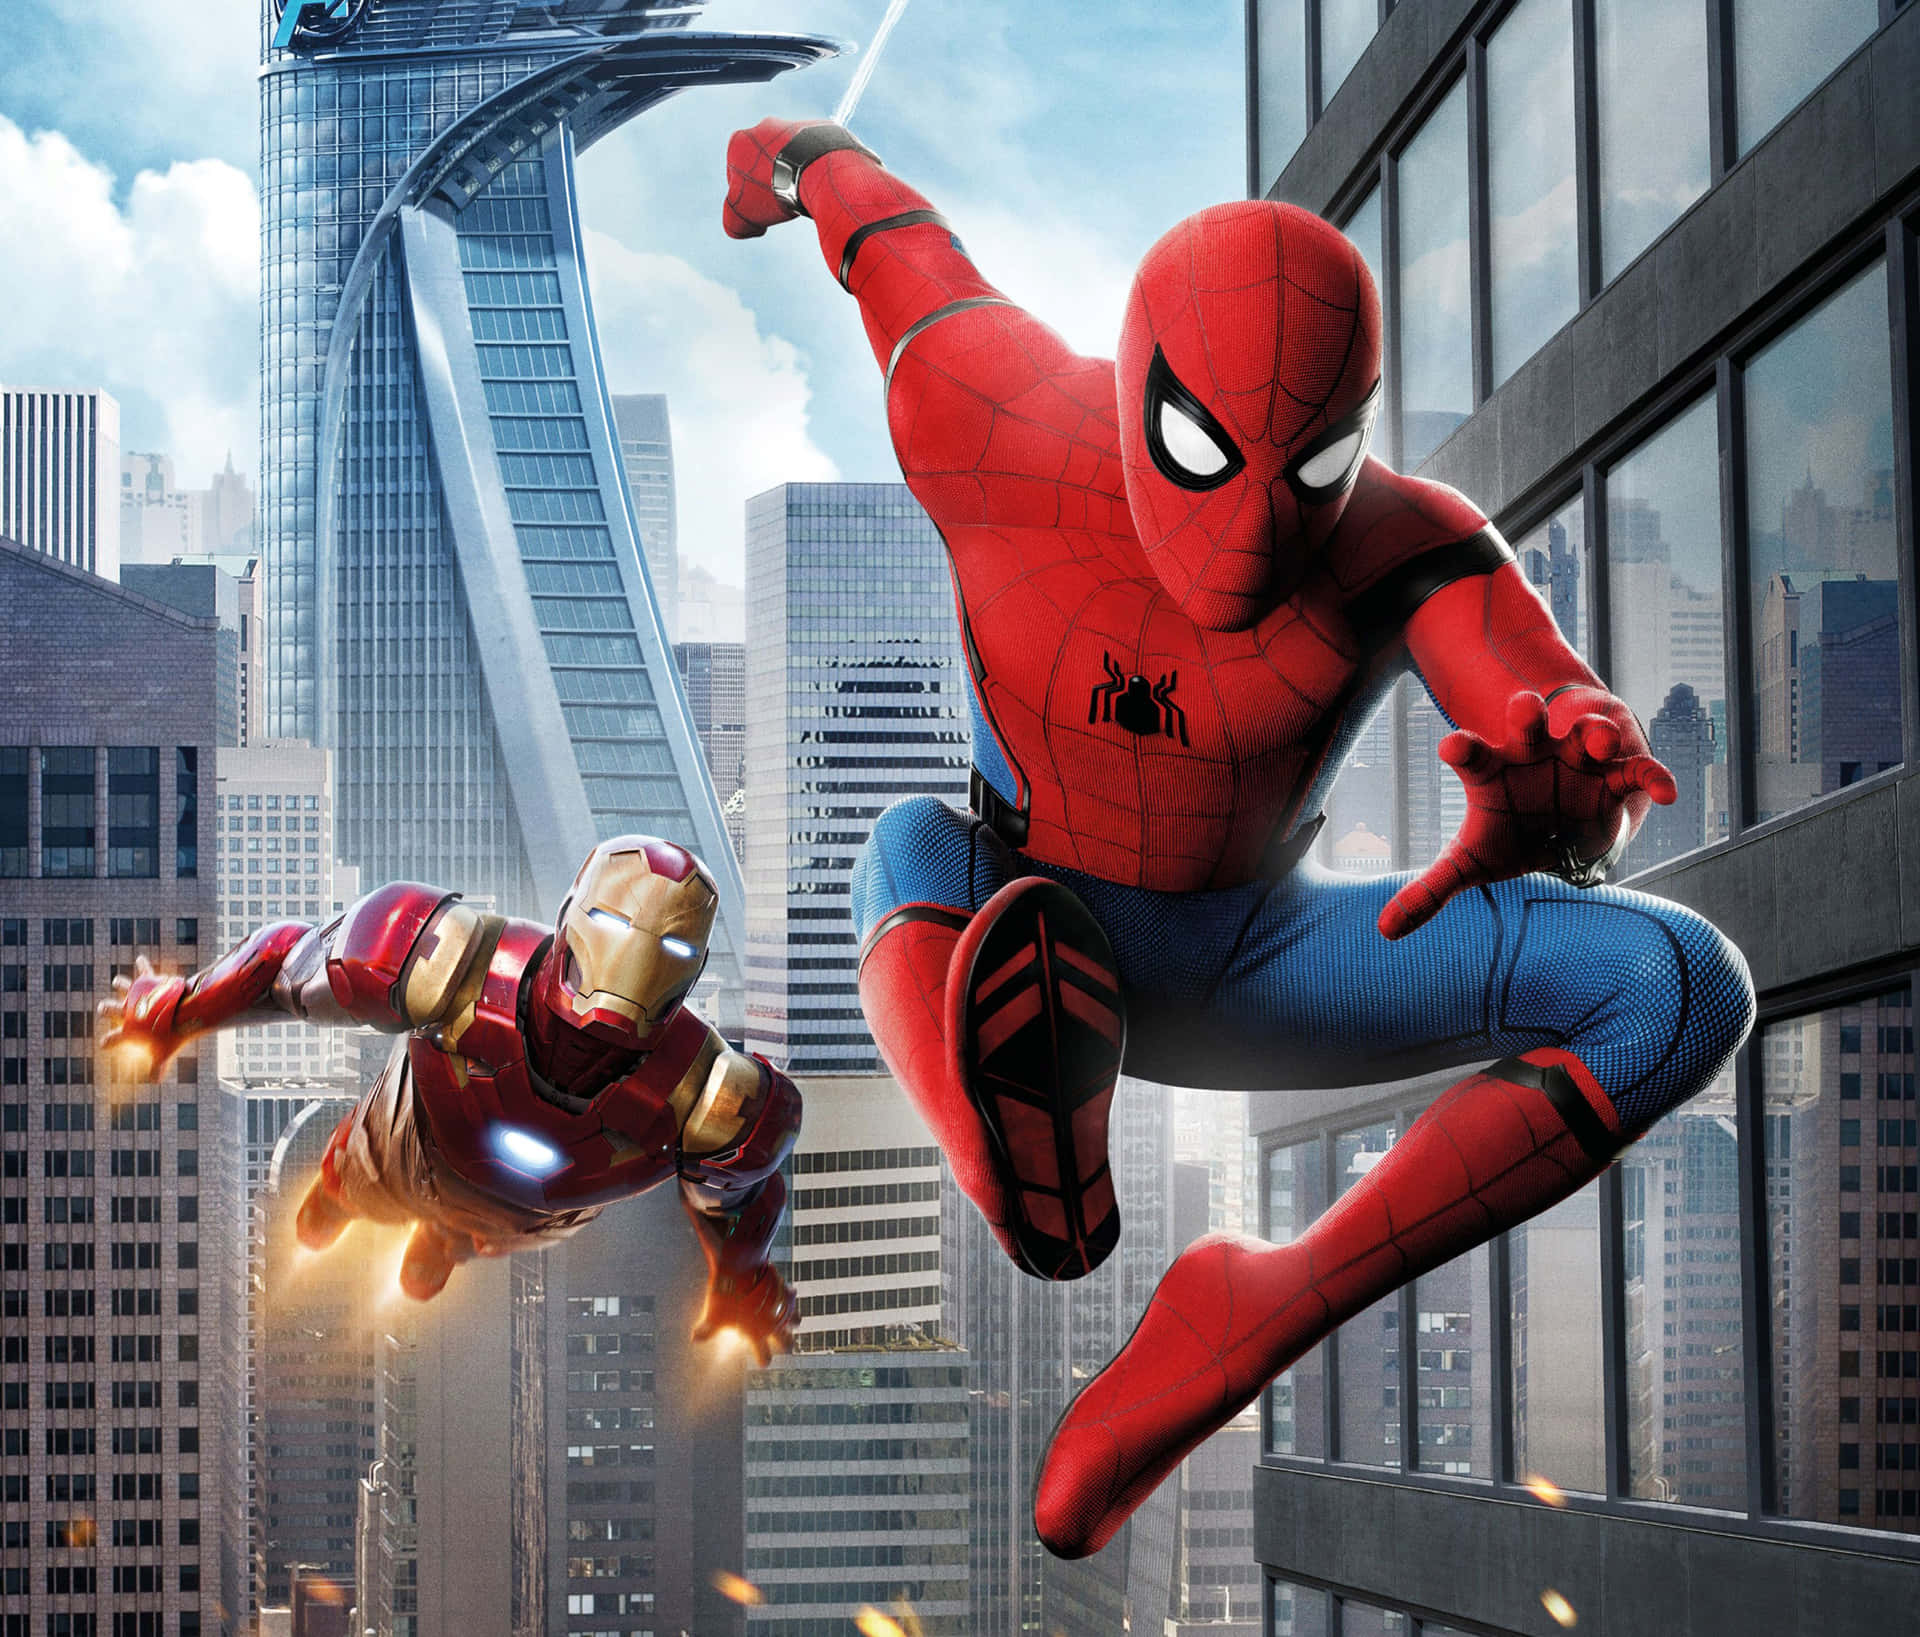 Spider - Man And Iron Man Flying In The Air